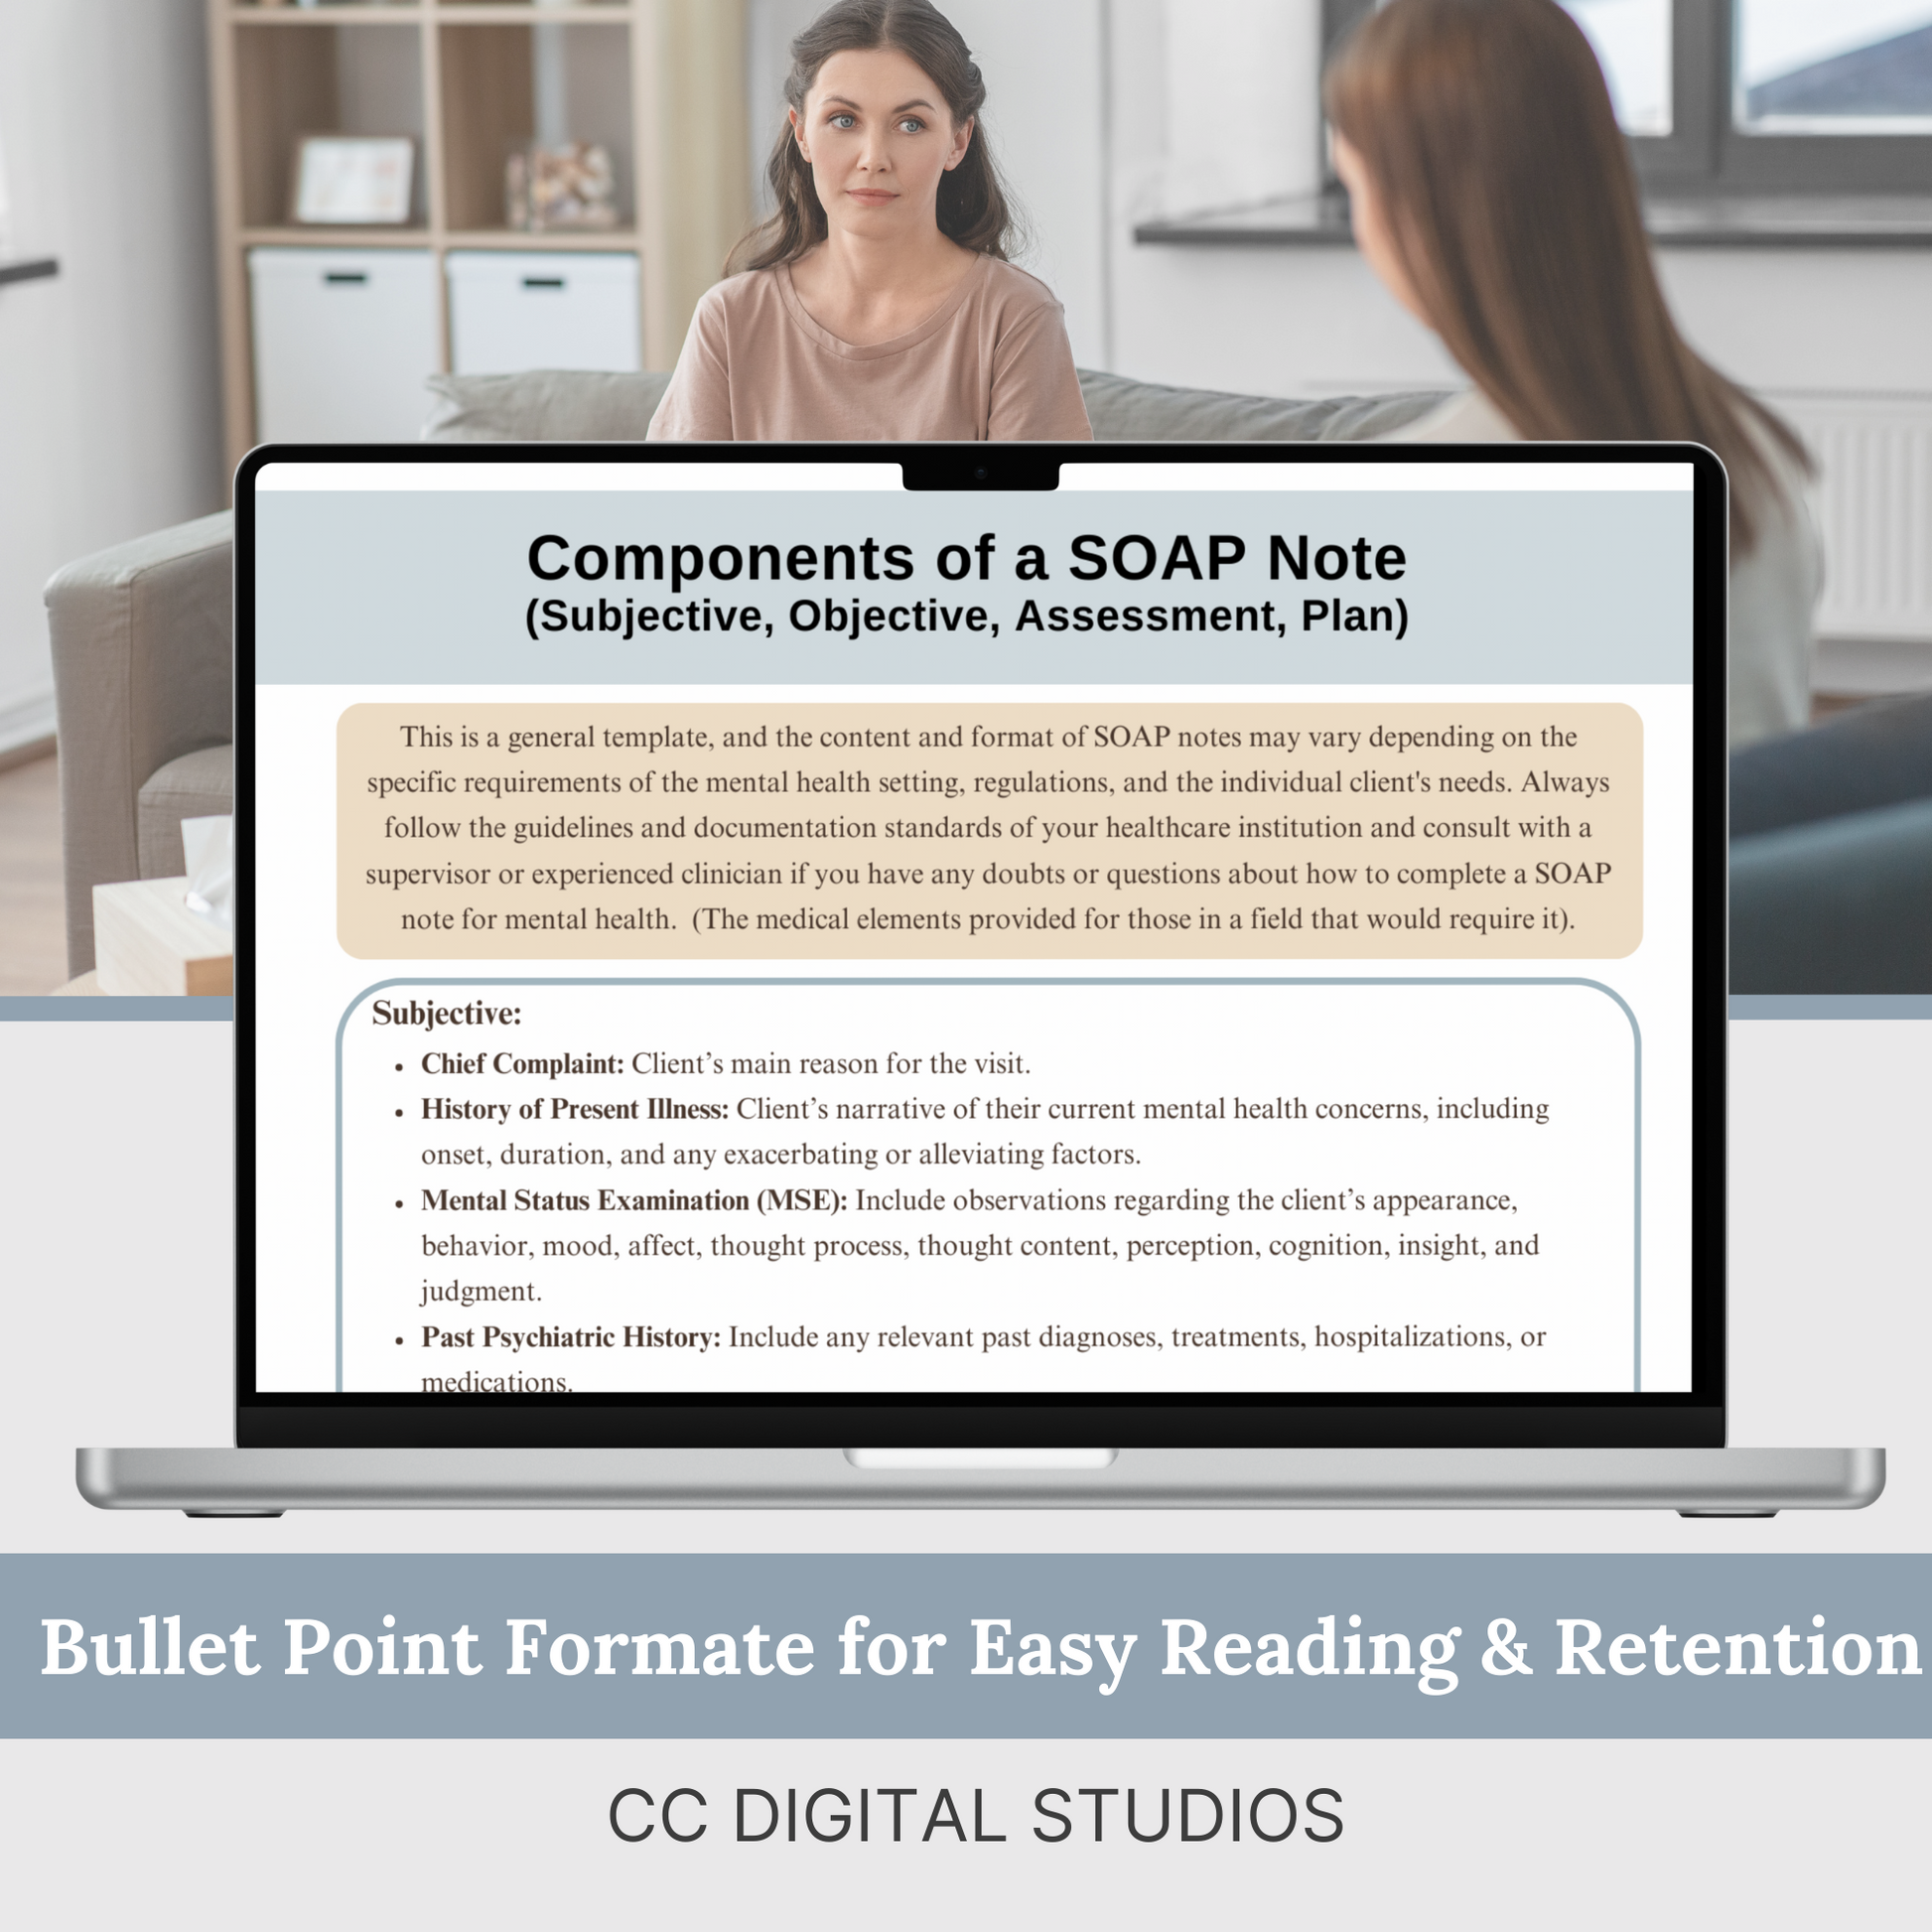 SOAP Note Guide tailored specifically for mental health therapists – your ultimate companion for efficient and organized documentation. Designed to streamline your therapy notes with user-friendly prompts and insightful examples